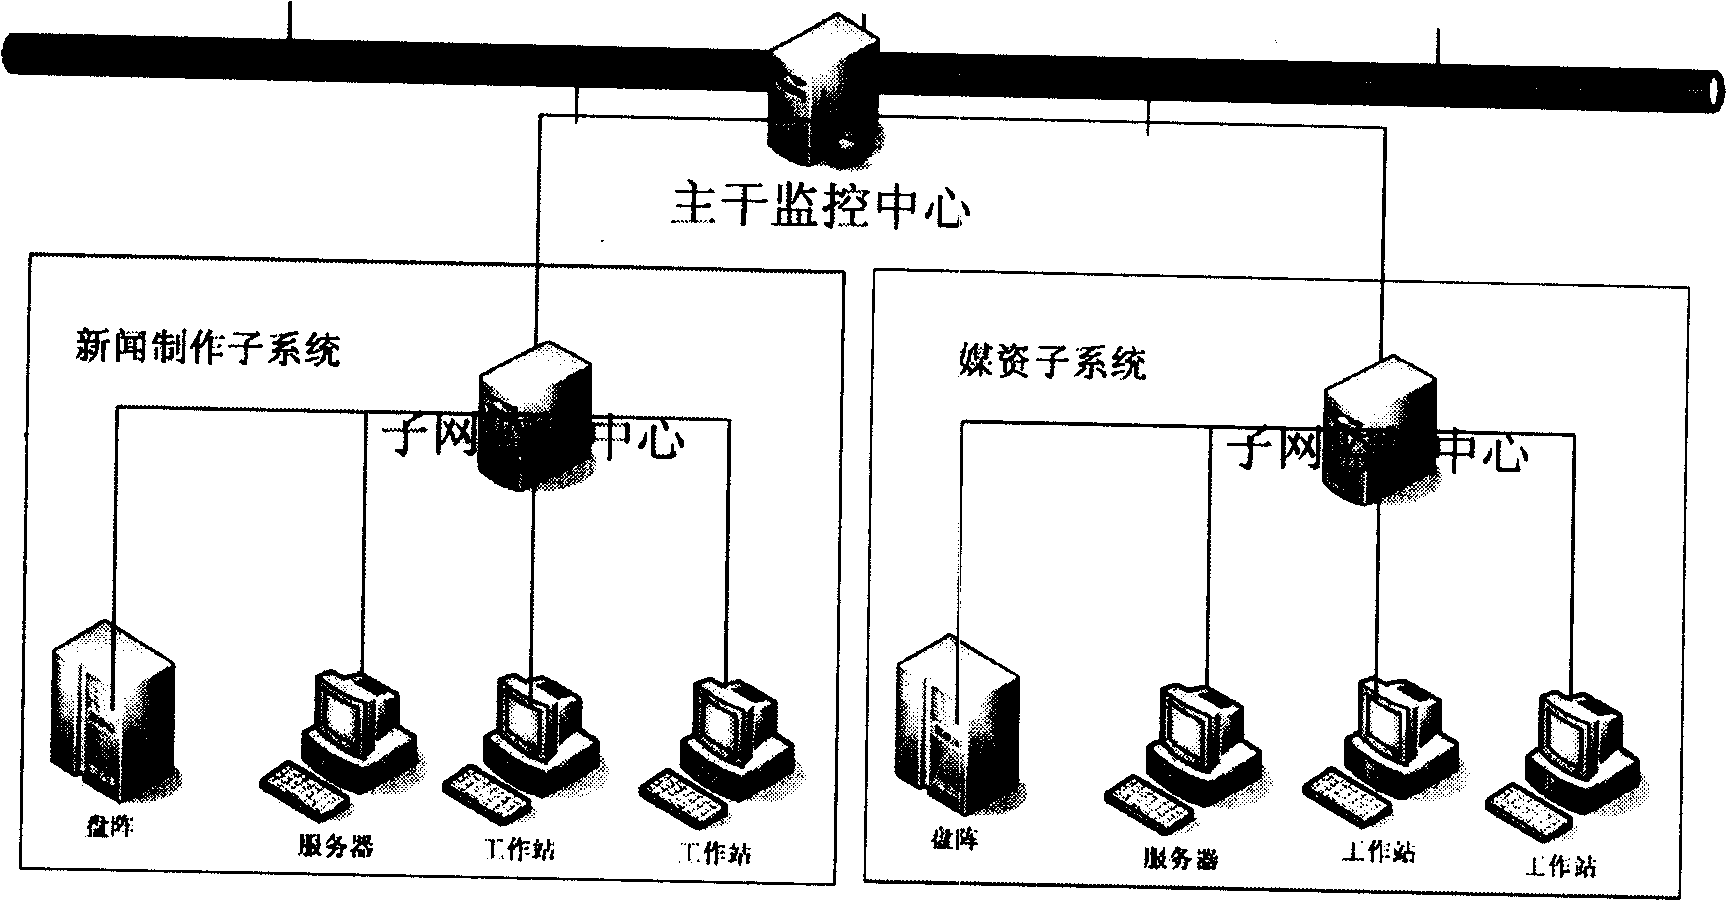 Method for hierarchical management of TV station equipment